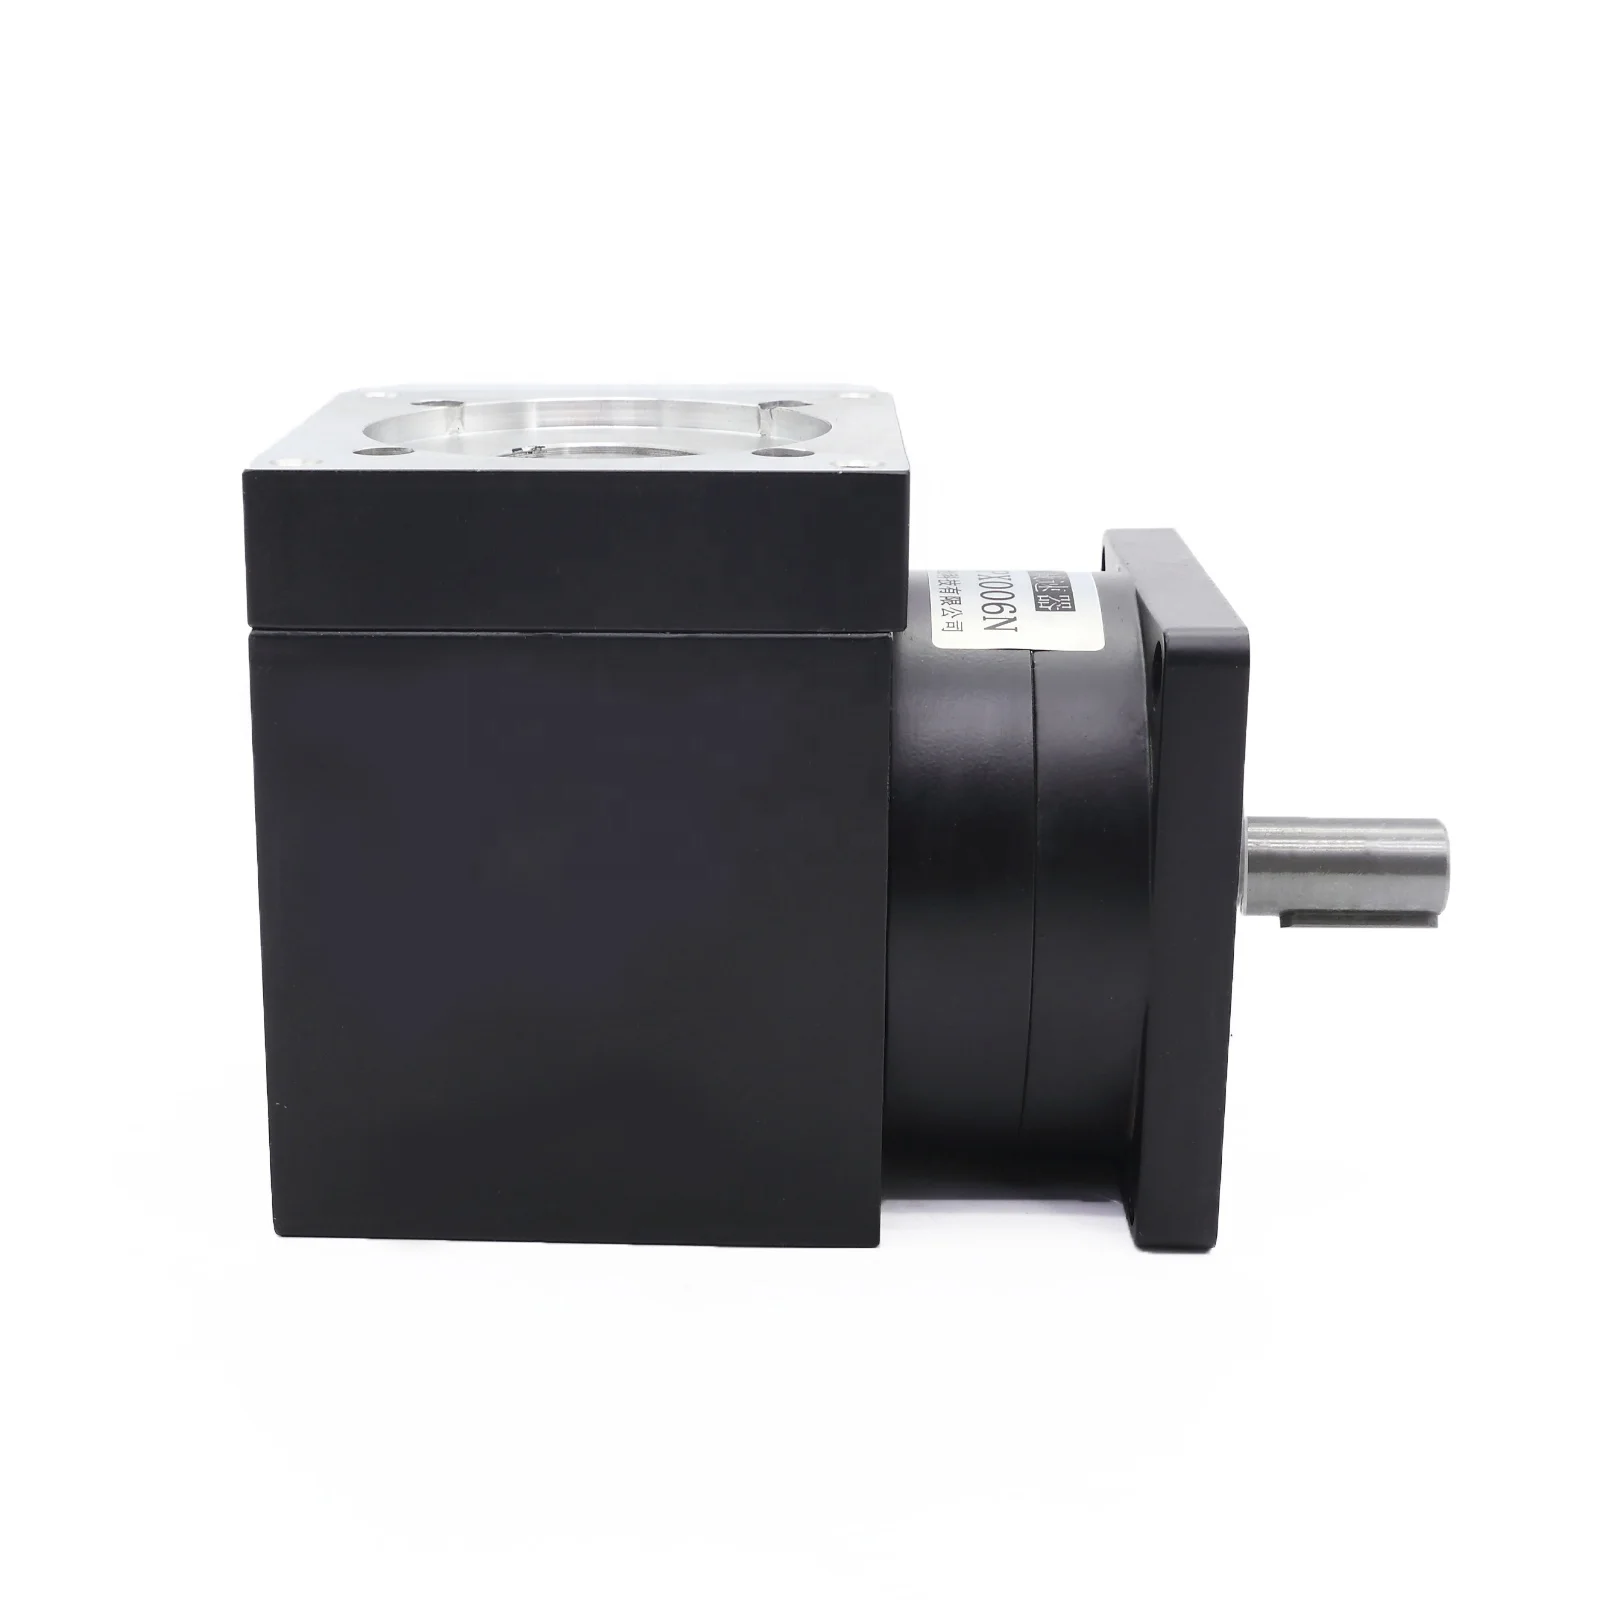 Second  deceleration can be equipped with Nema43 stepping servo motor  Right-angle planetary reducer